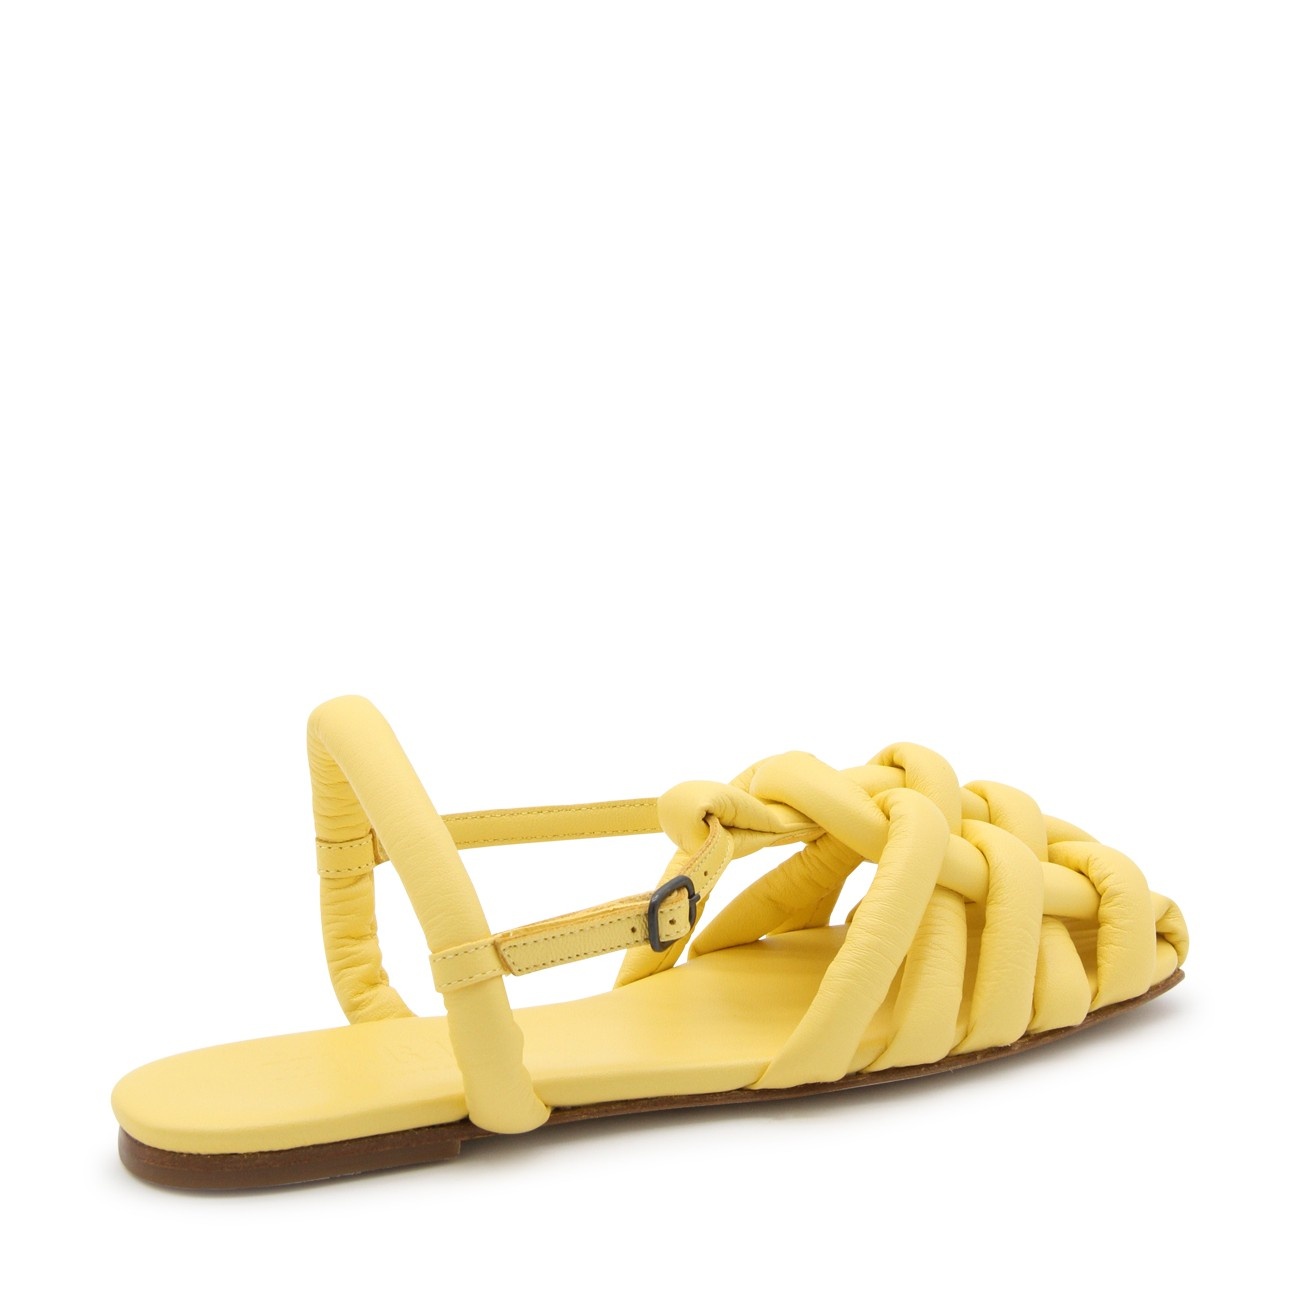 yellow leather cabersa sandals - 3